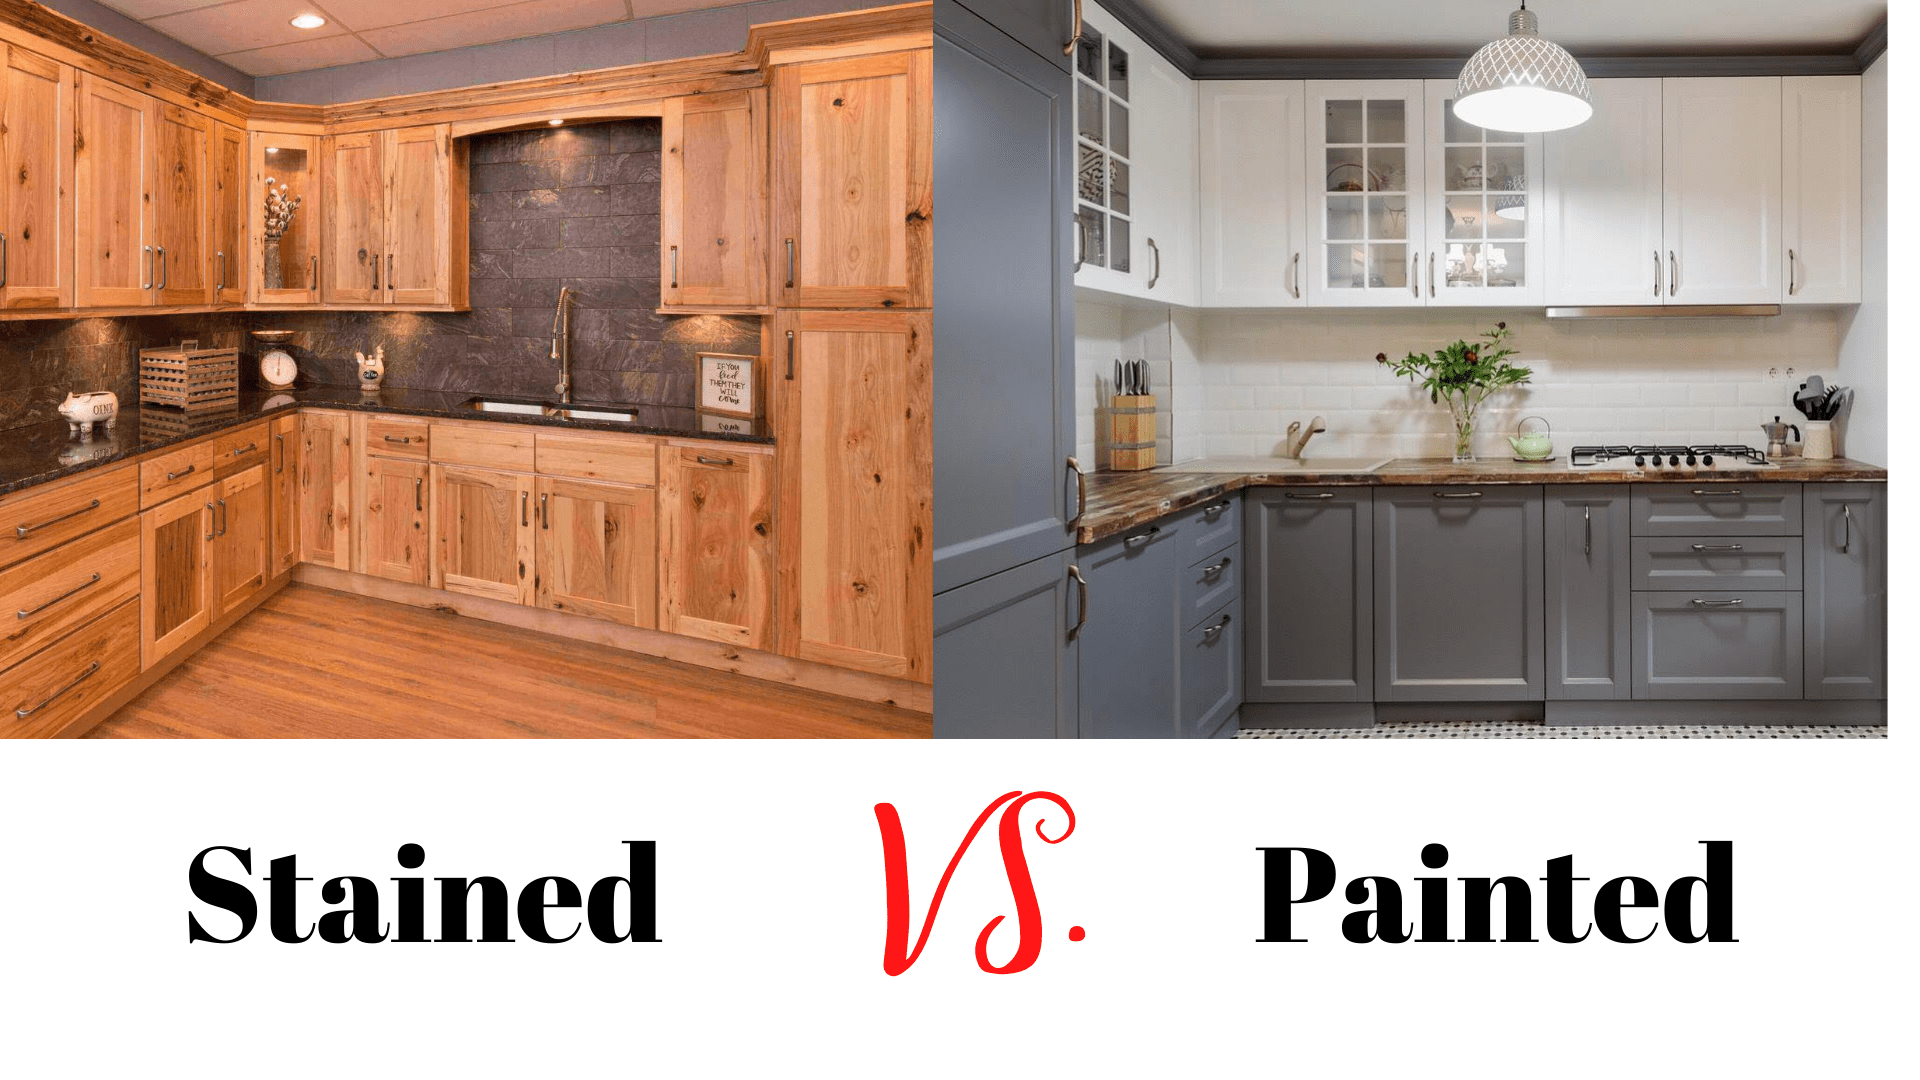 Stained Kitchen Cabinets Pros Cons, Best Way To Paint Over Stained Kitchen Cabinets